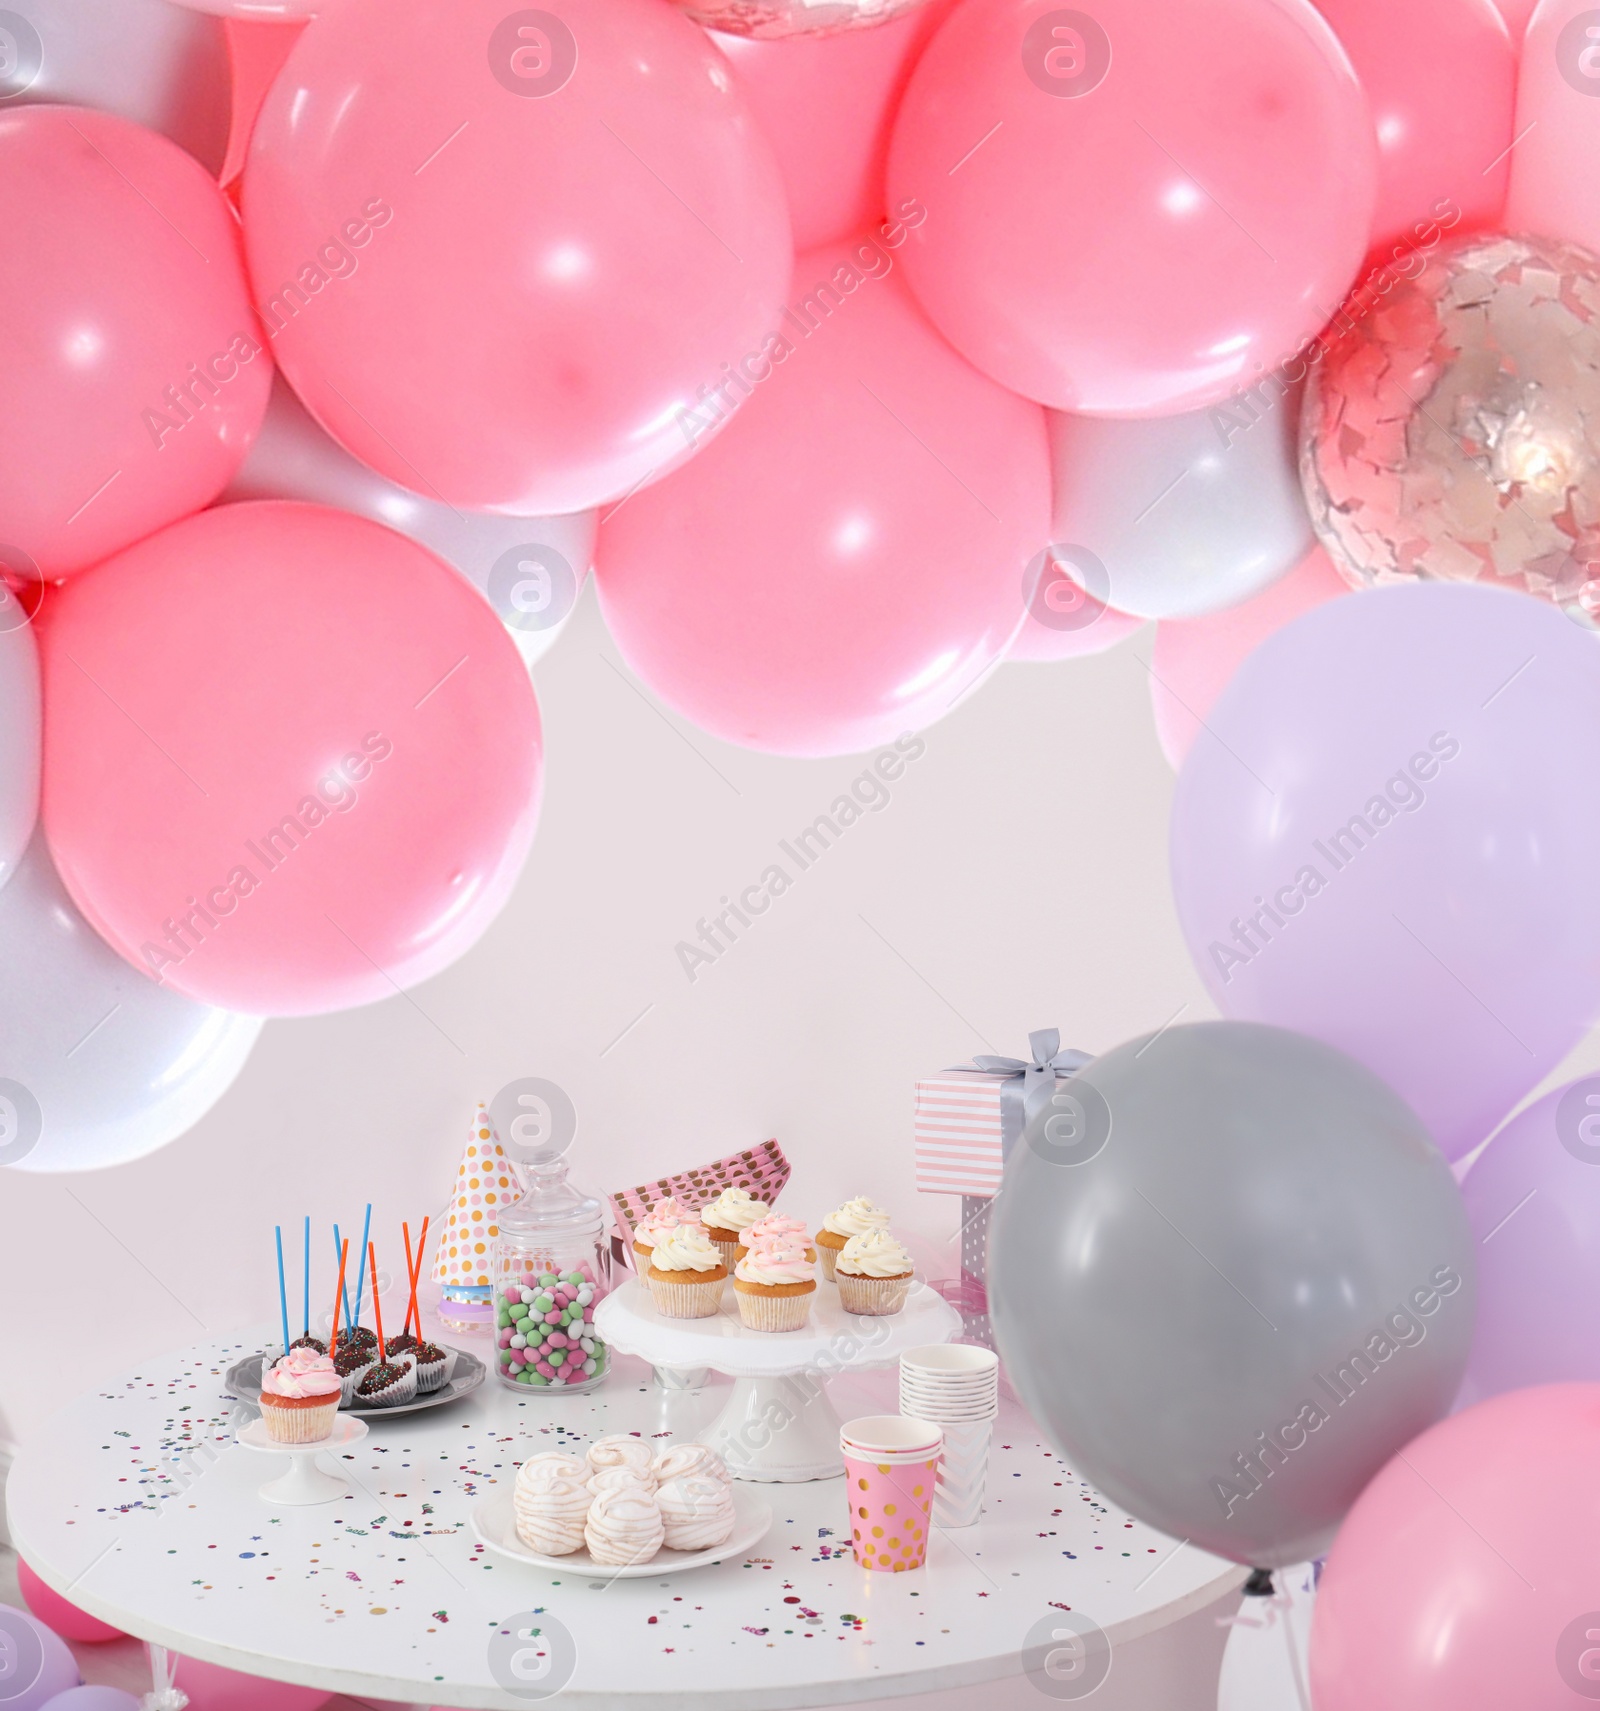 Image of Baby shower party for girl. Tasty treats on table in room decorated with balloons